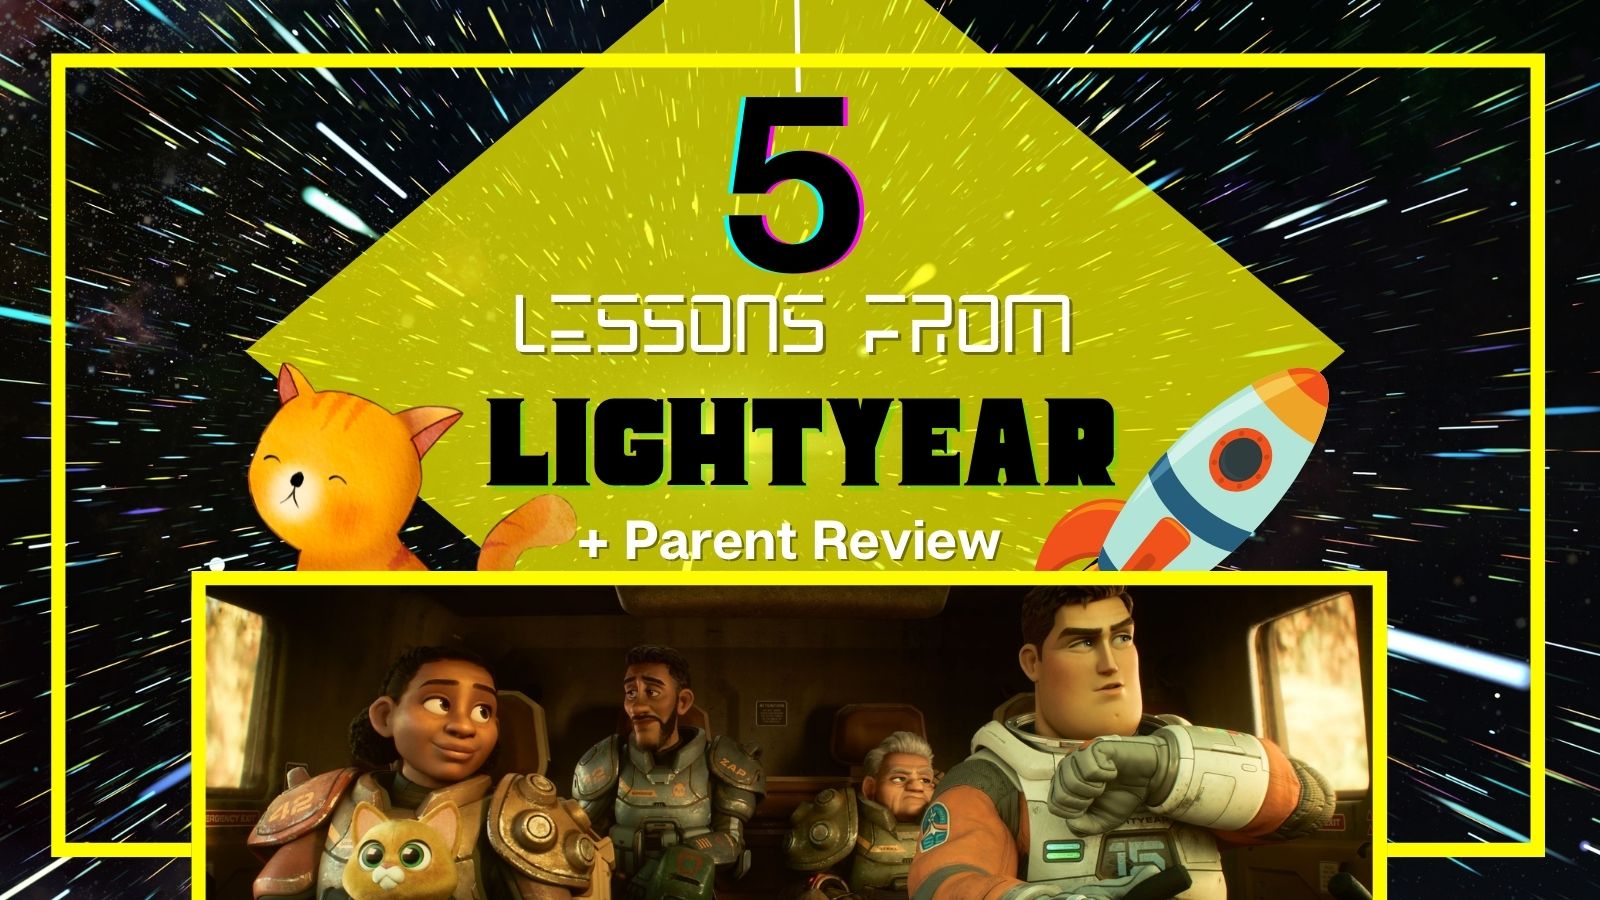 5 lessons from lightyear parent review image drom disney media of main characters